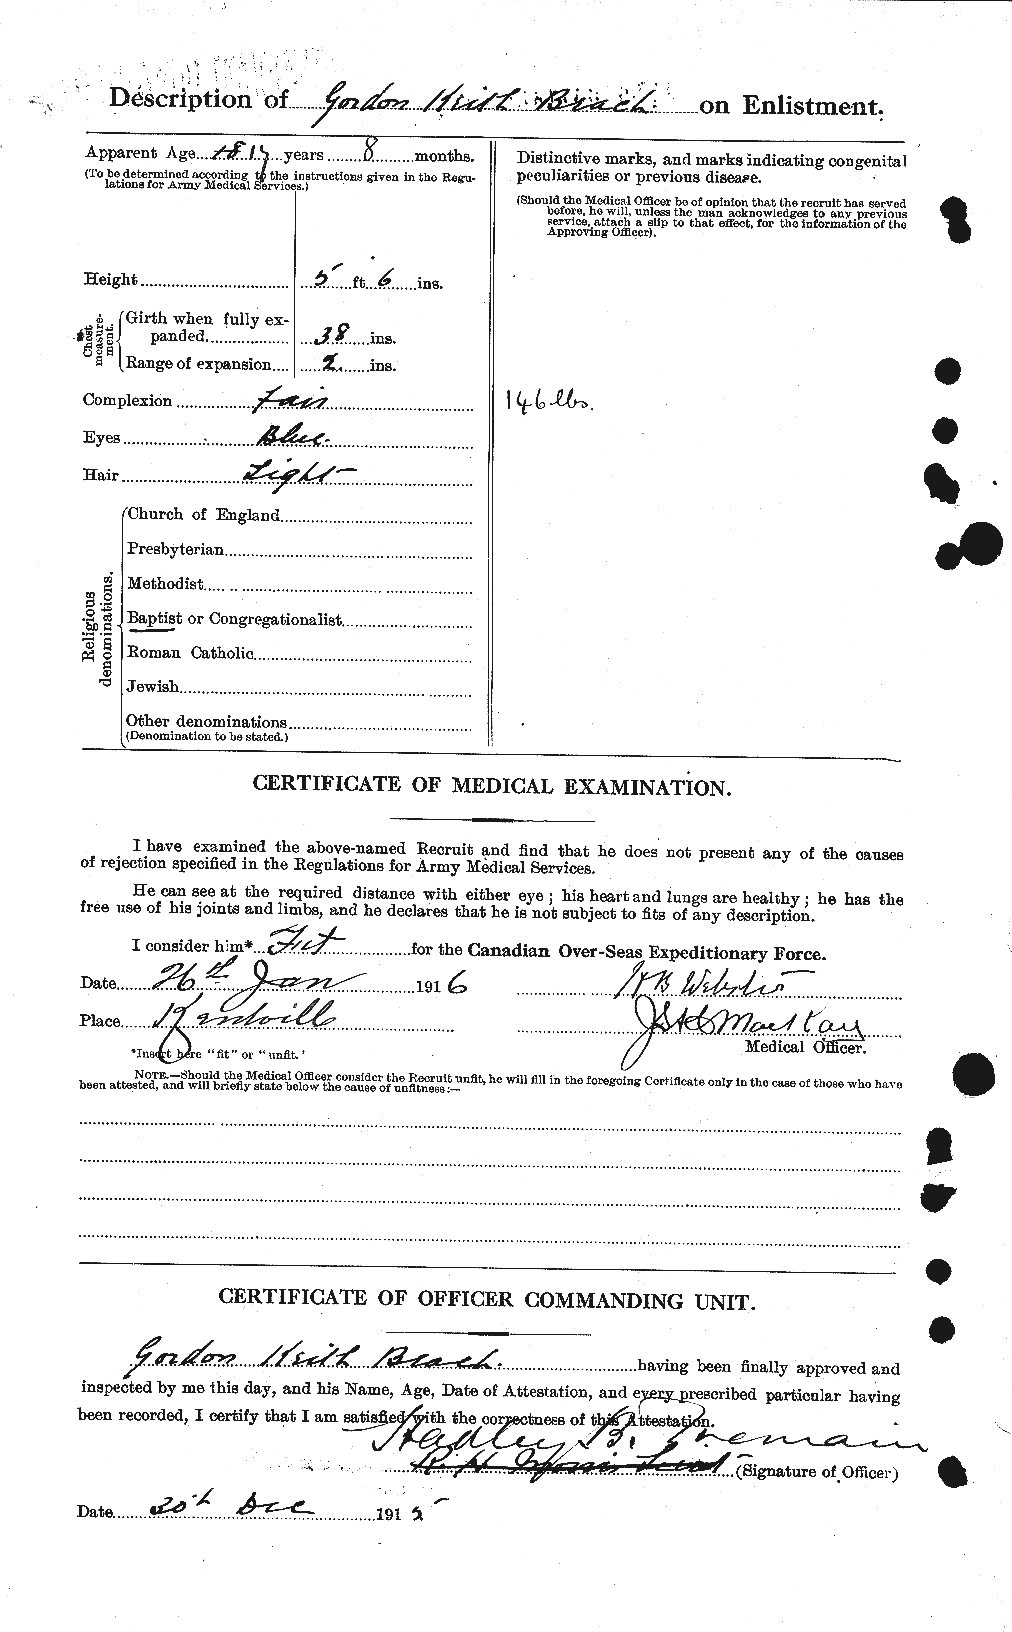 Personnel Records of the First World War - CEF 235105b